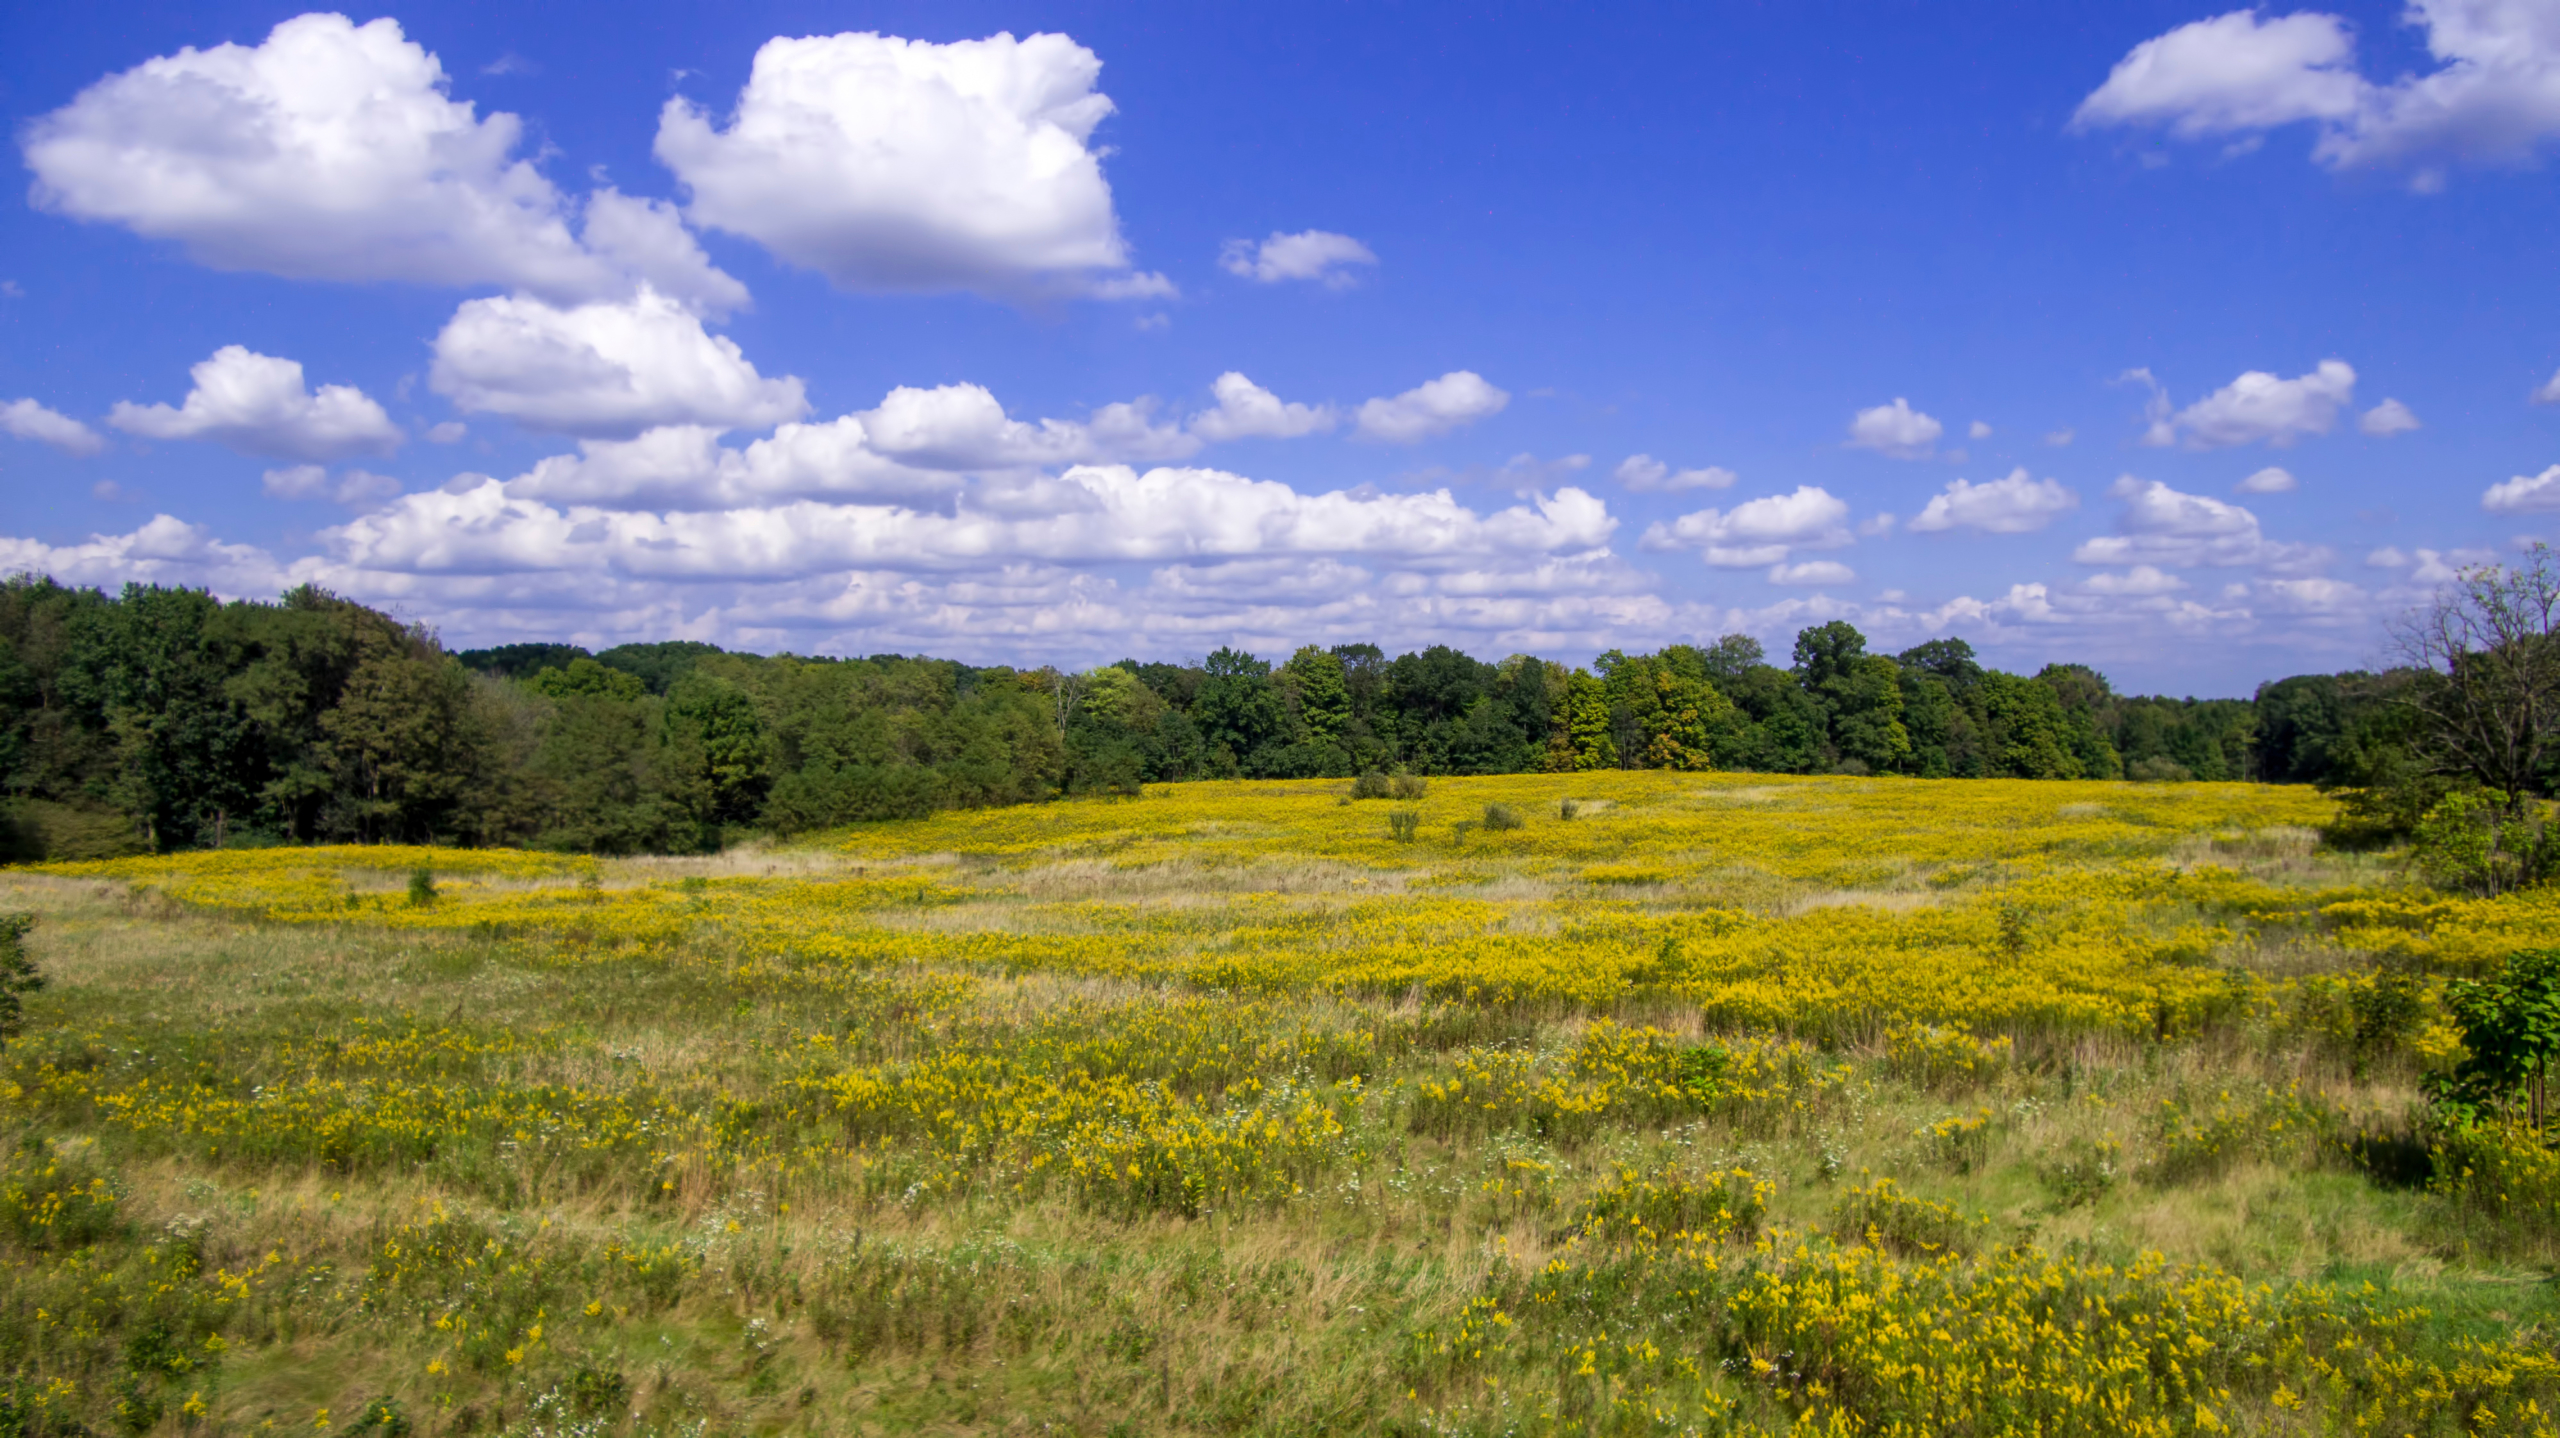 Goldenrod field in Wooster, Ohio.